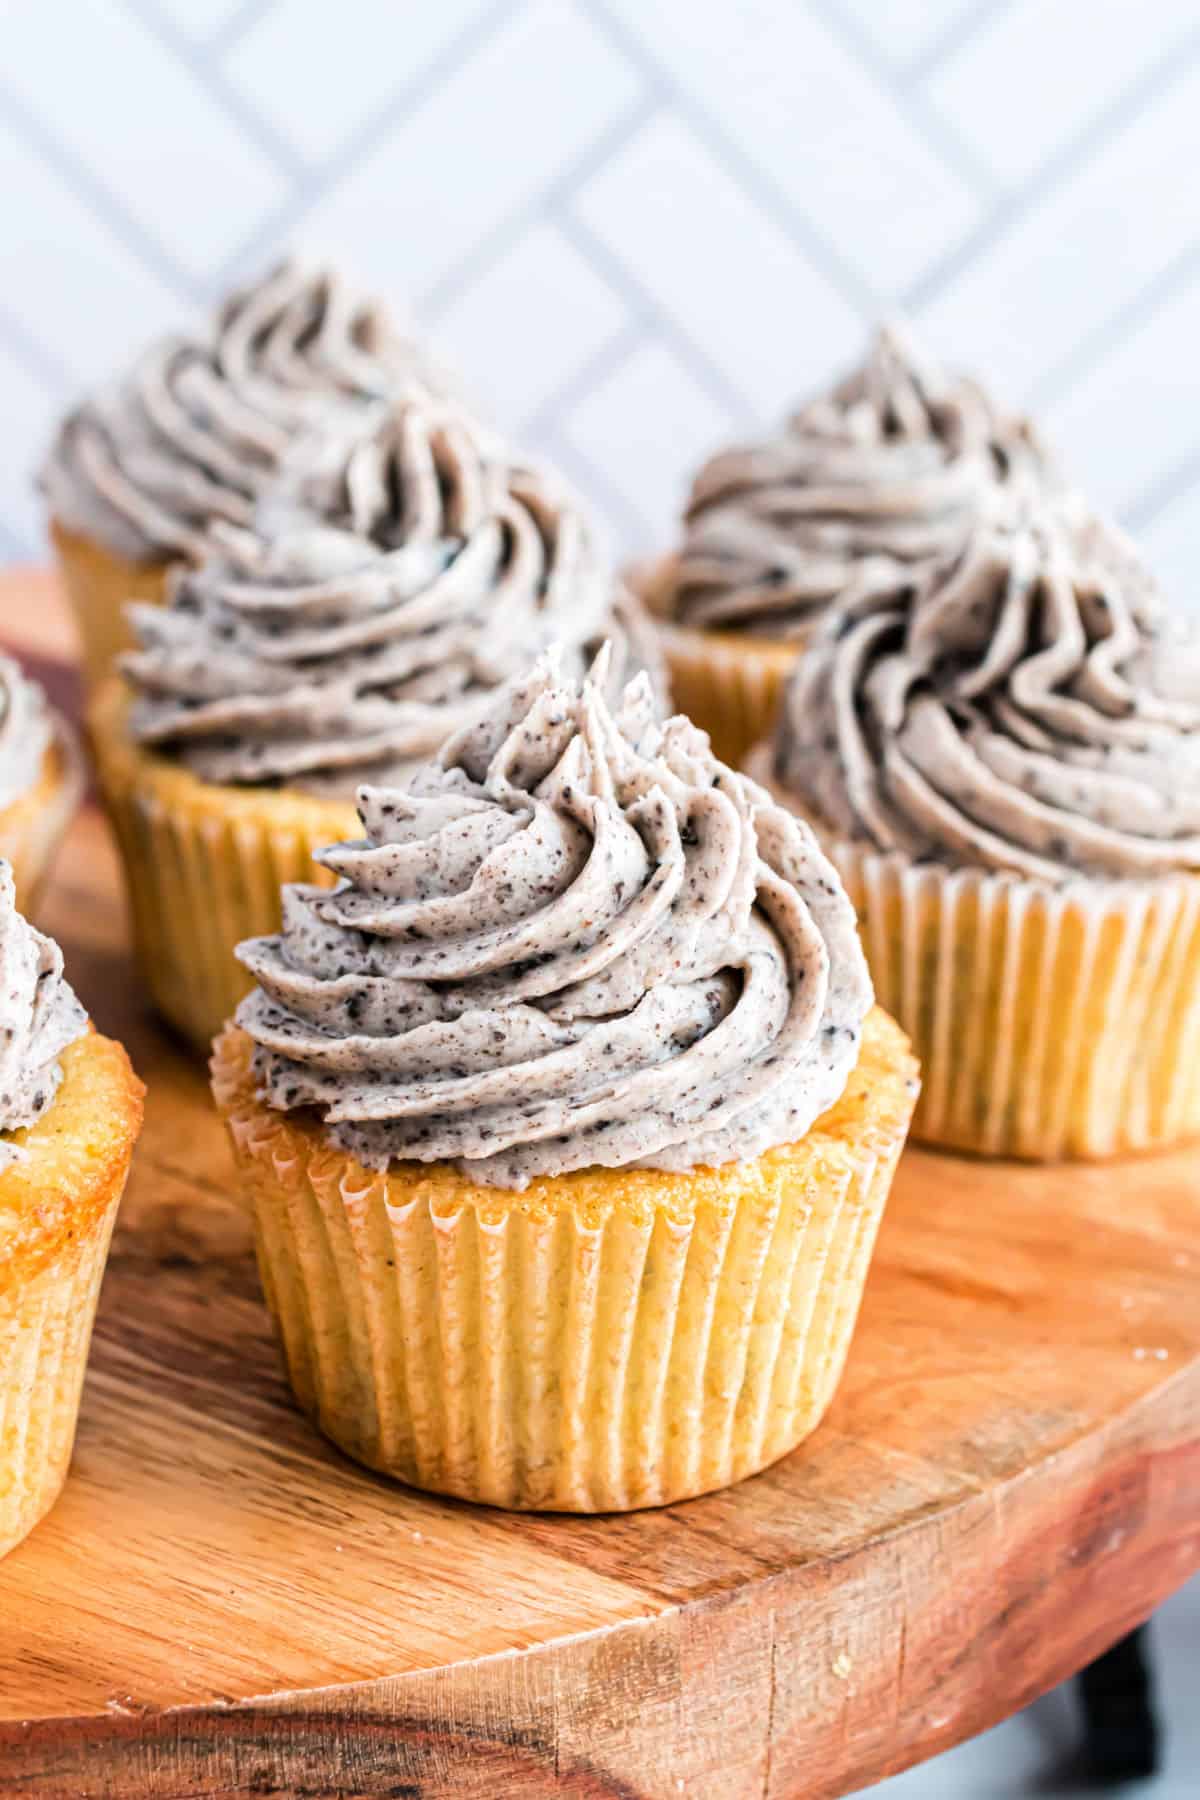 Oreo cupcakes with oreo frosting on a wooden cake platter.